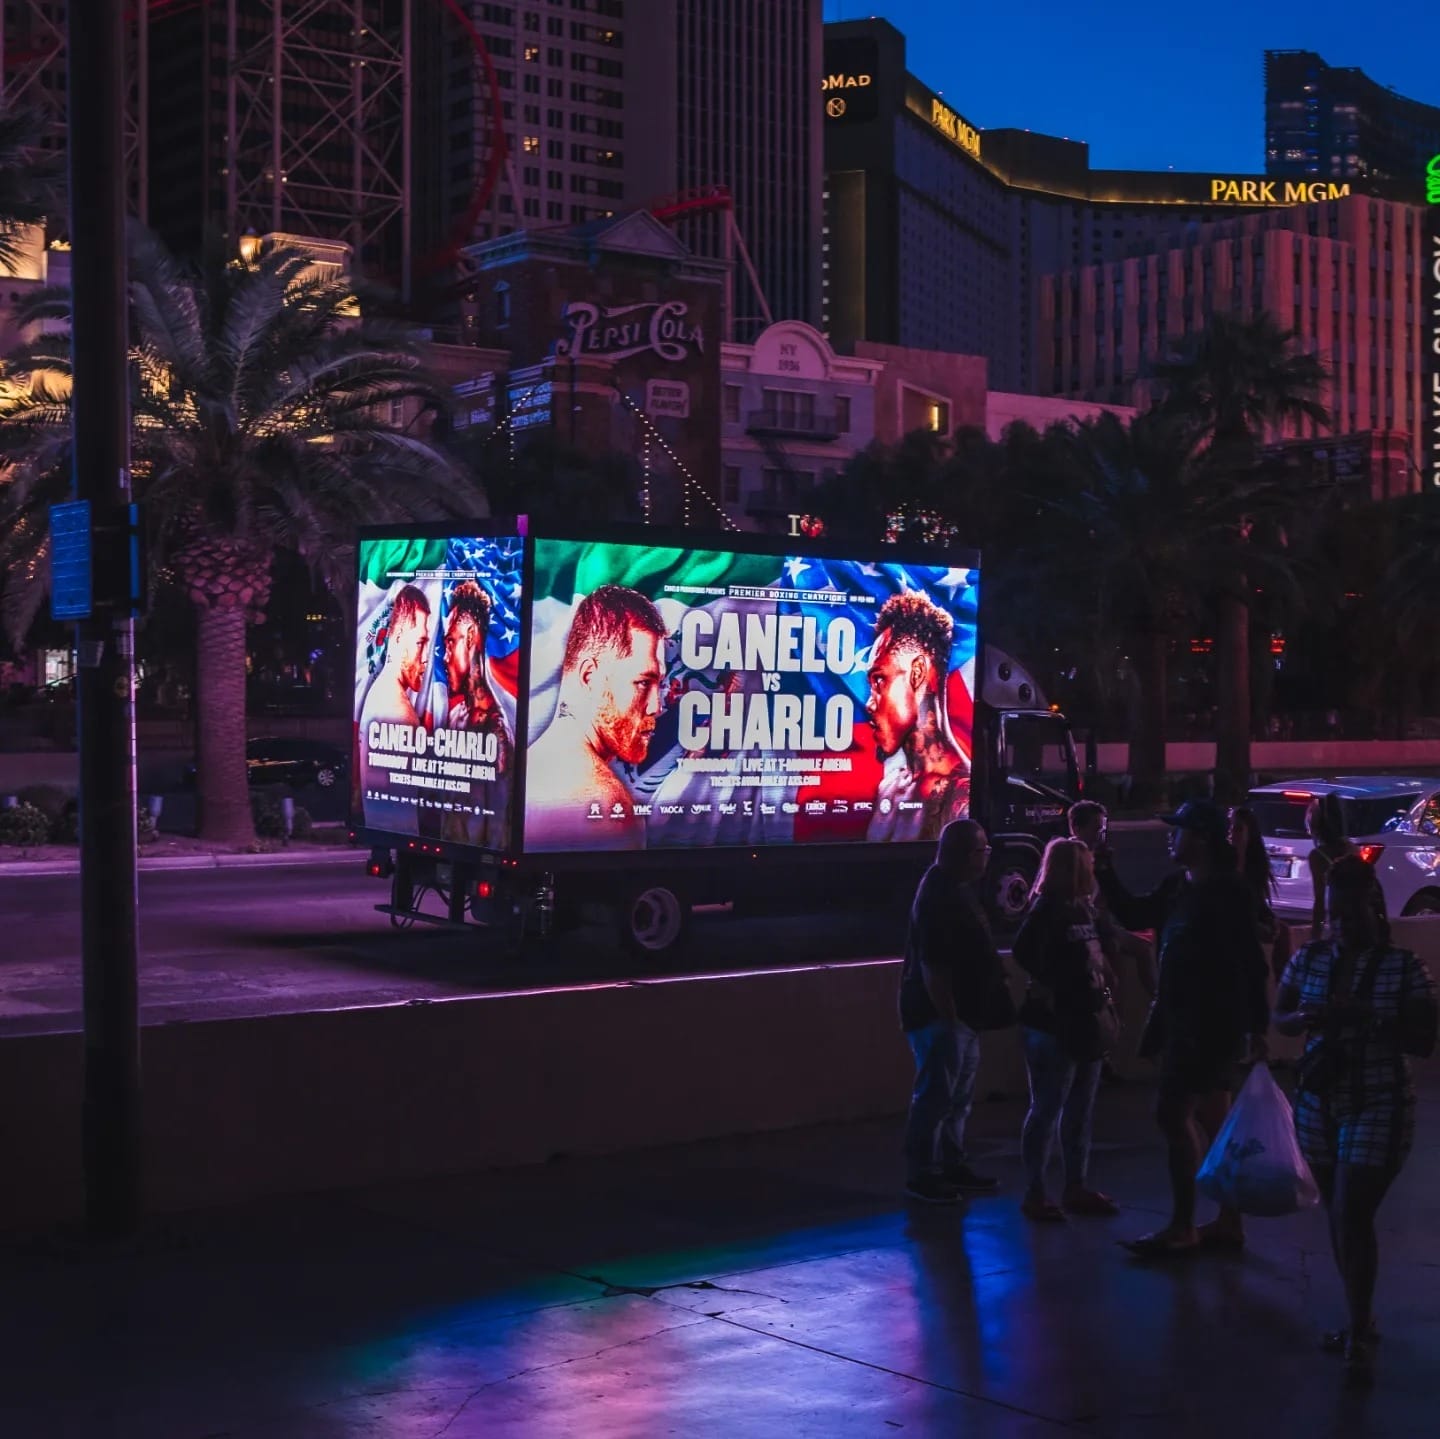 Canelo vs Charlo: A Battle for the Undisputed Championship at T-Mobile Arena